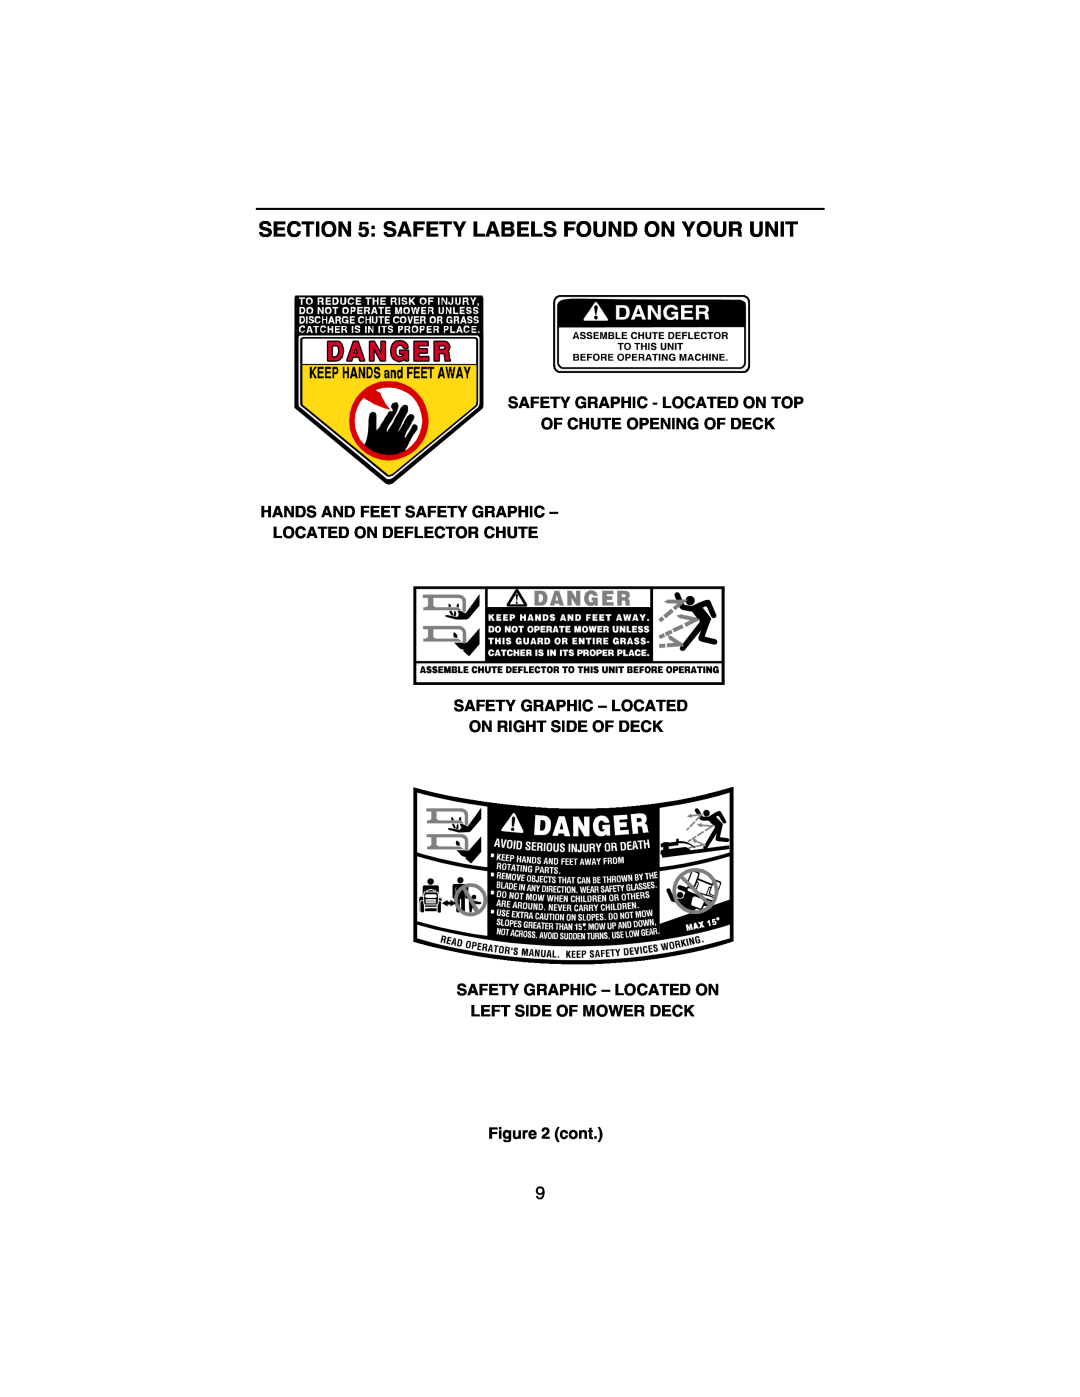 Cub Cadet 3184 manual Safety Labels Found On Your Unit, Safety Graphic - Located On Top Of Chute Opening Of Deck 